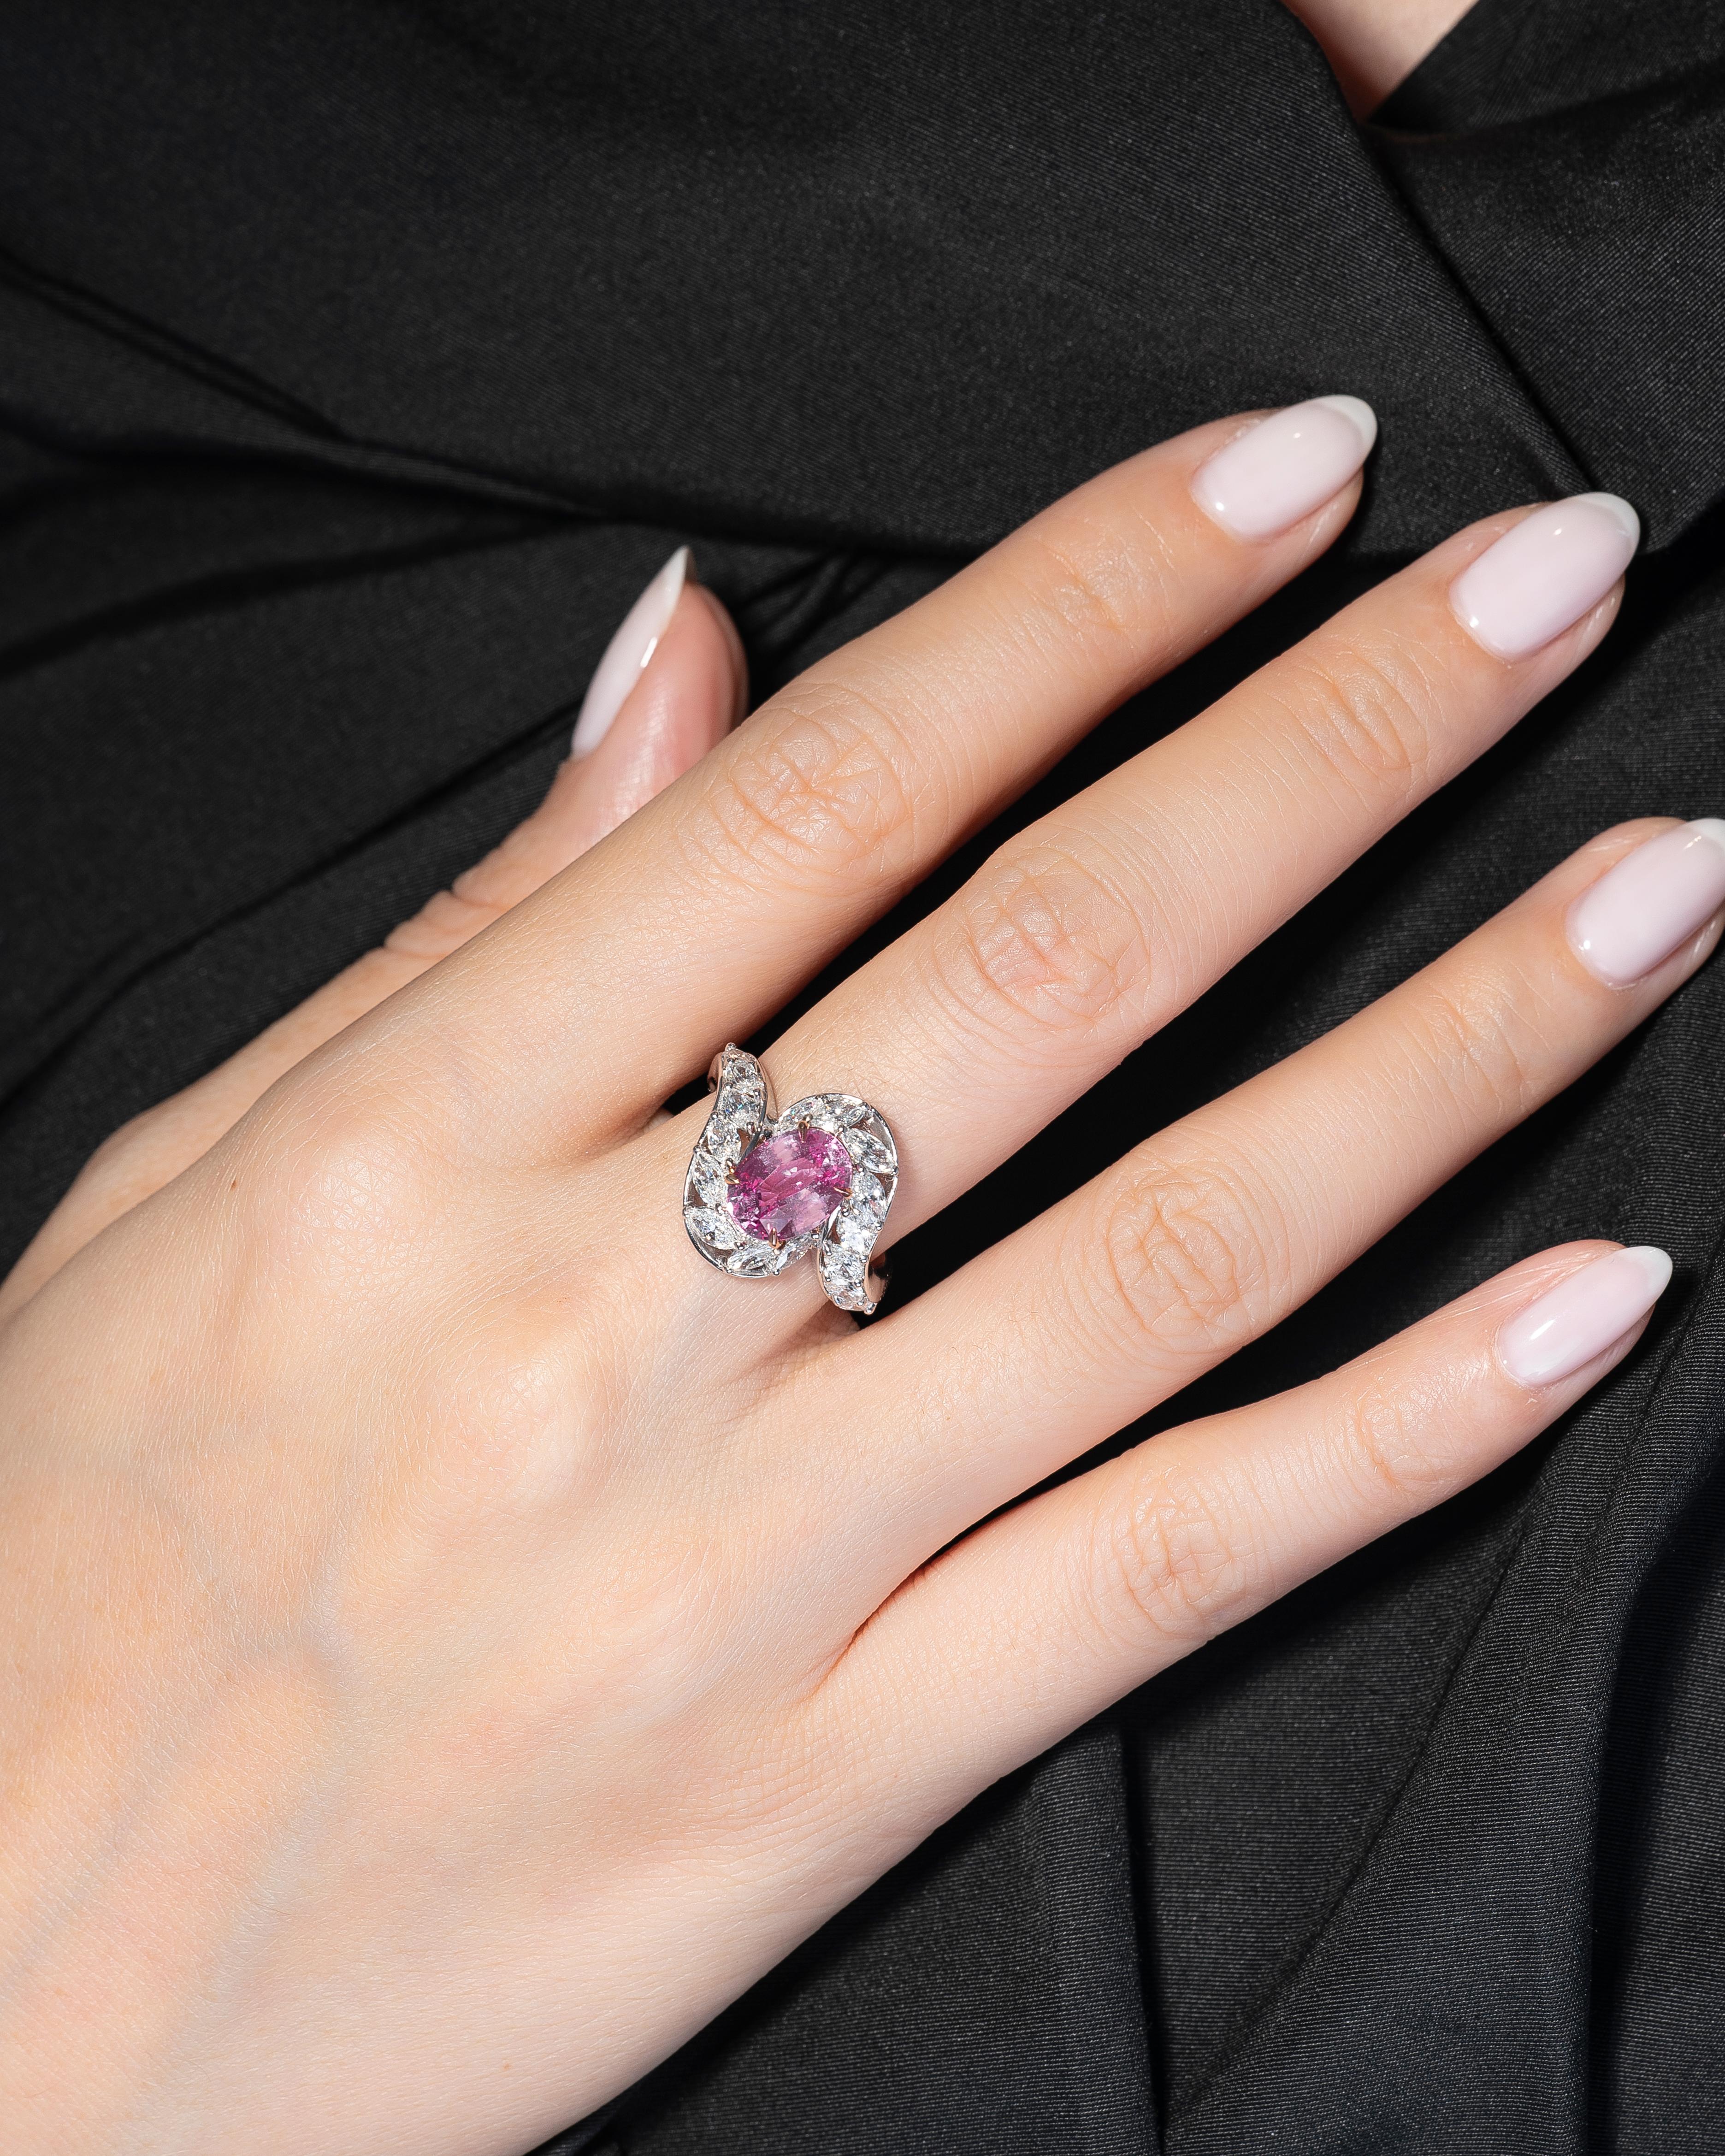 Padparadscha gemstones are gorgeous jewel tones that are classified under the Sapphire family. Their color is striking and memorable. This 3.10 carat non-heated Madagascar Parparadscha Sapphire is in a classic oval shape and has been certified by